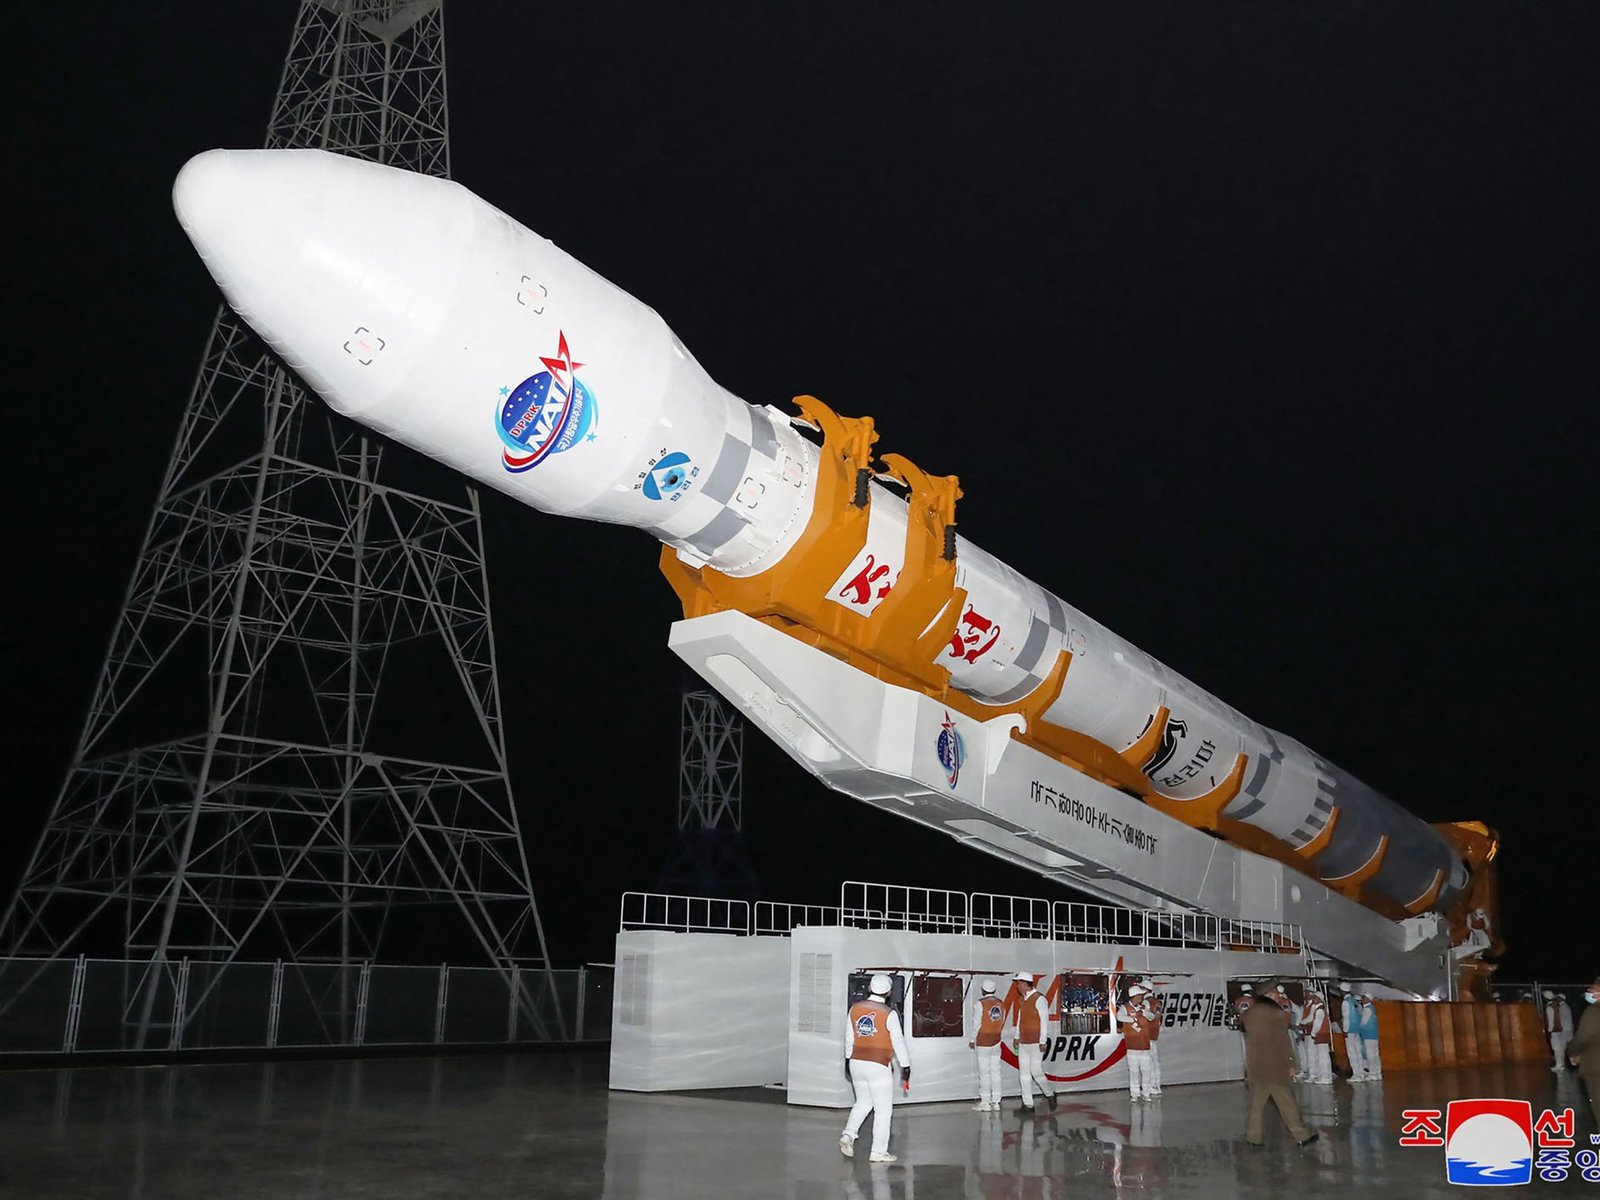 North Korea plans to launch space satellite by June 4: Japan | Weapons News